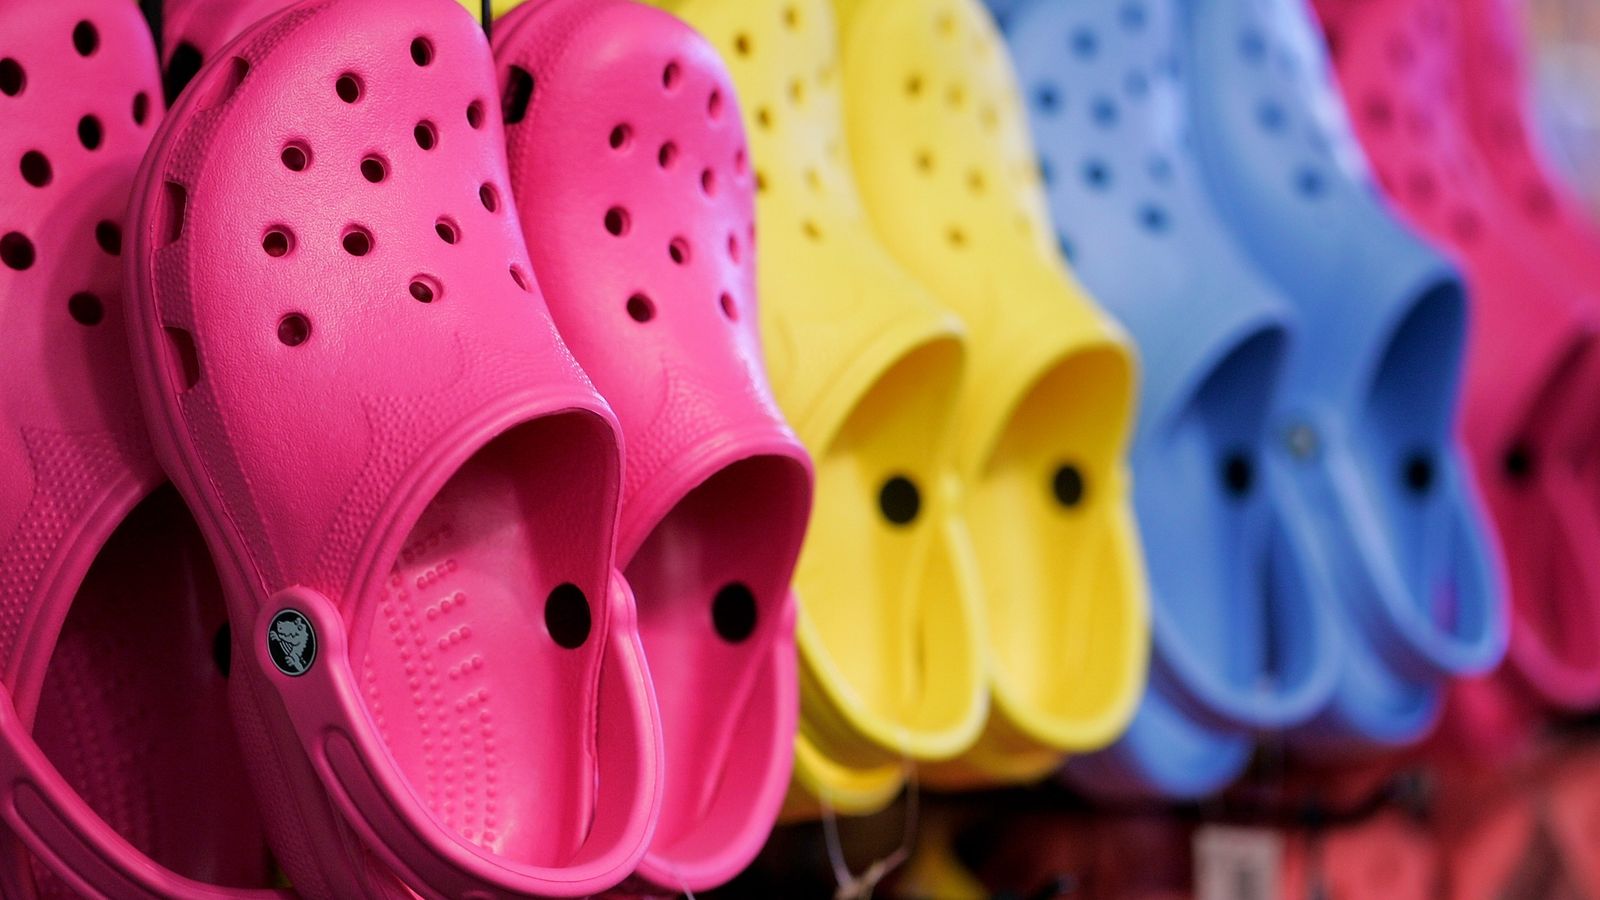 Free Crocs giveaway 2022 Enter Croctober contest for free shoes